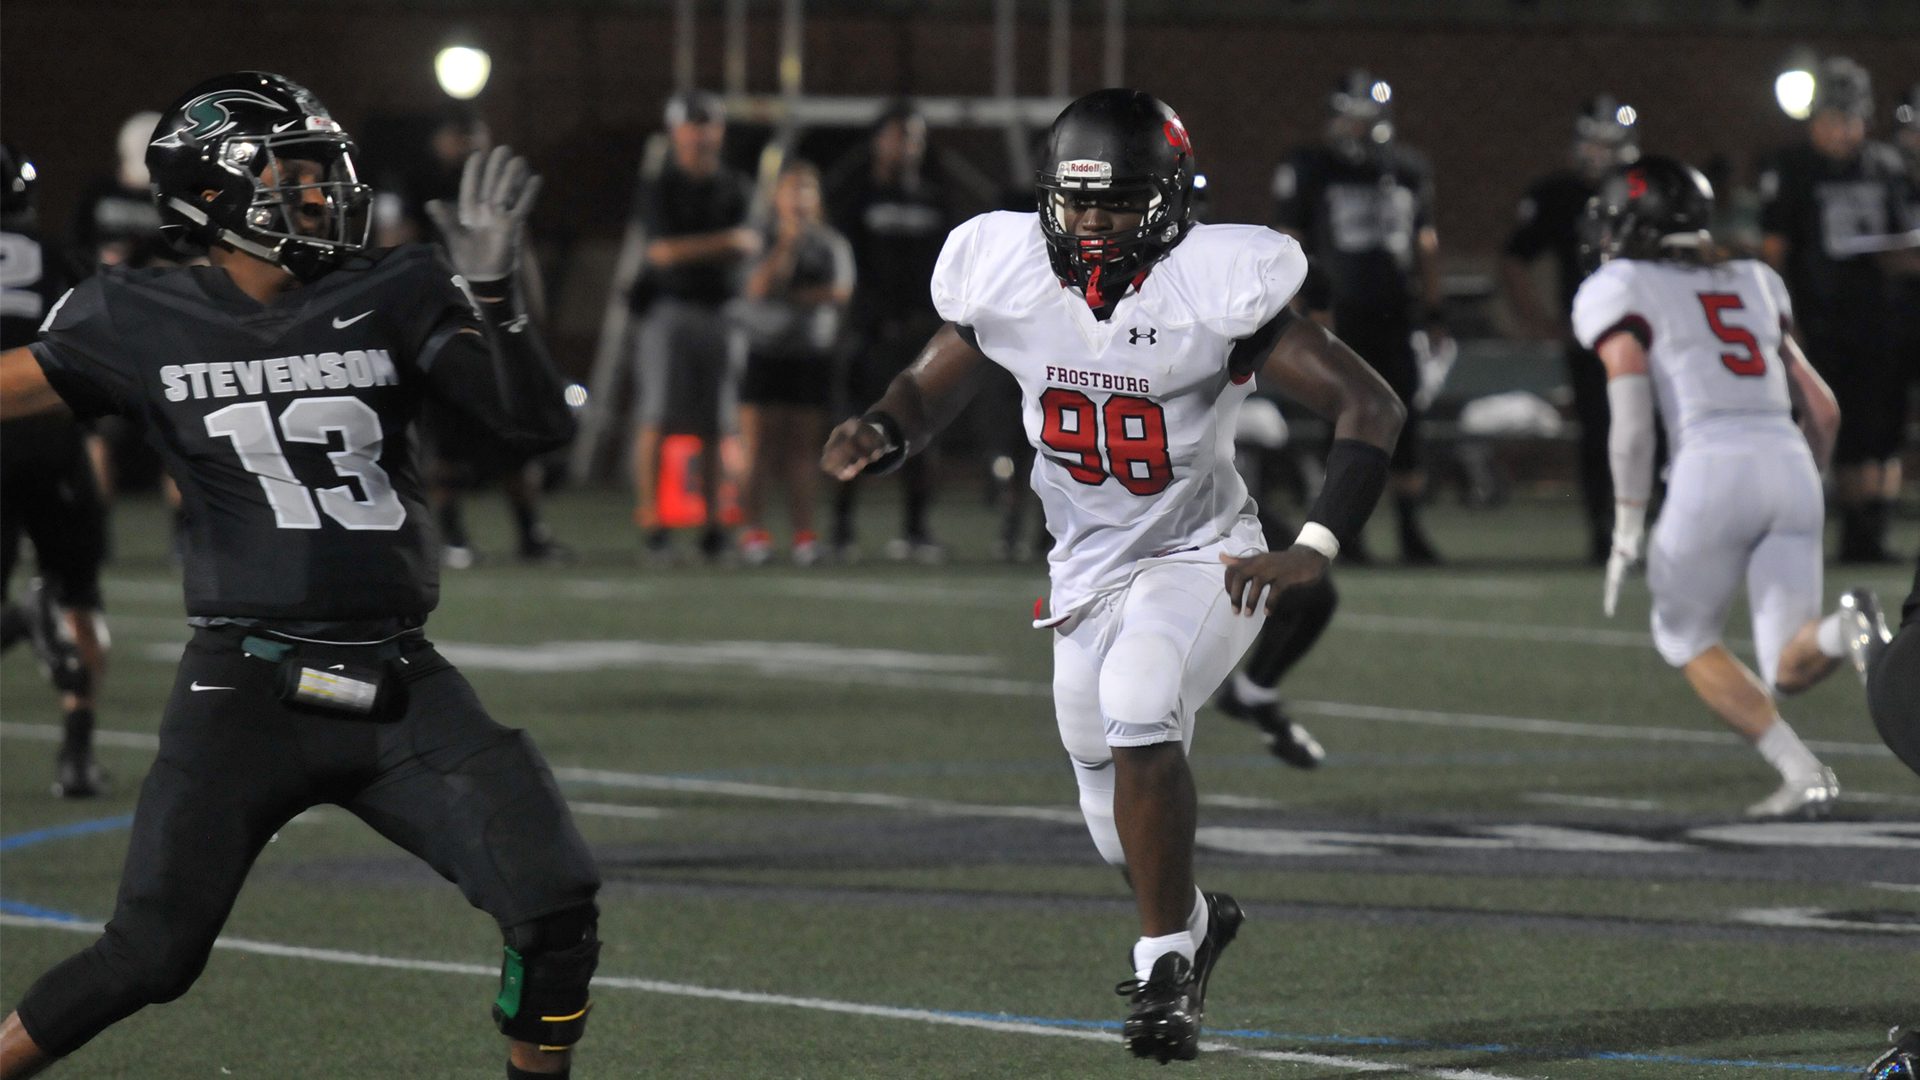 Carl Igweh the underrated pass rusher from Frostburg State is a player to keep an eye on in the 2022 NFL Draft. Brandon Davis breaks down his film.